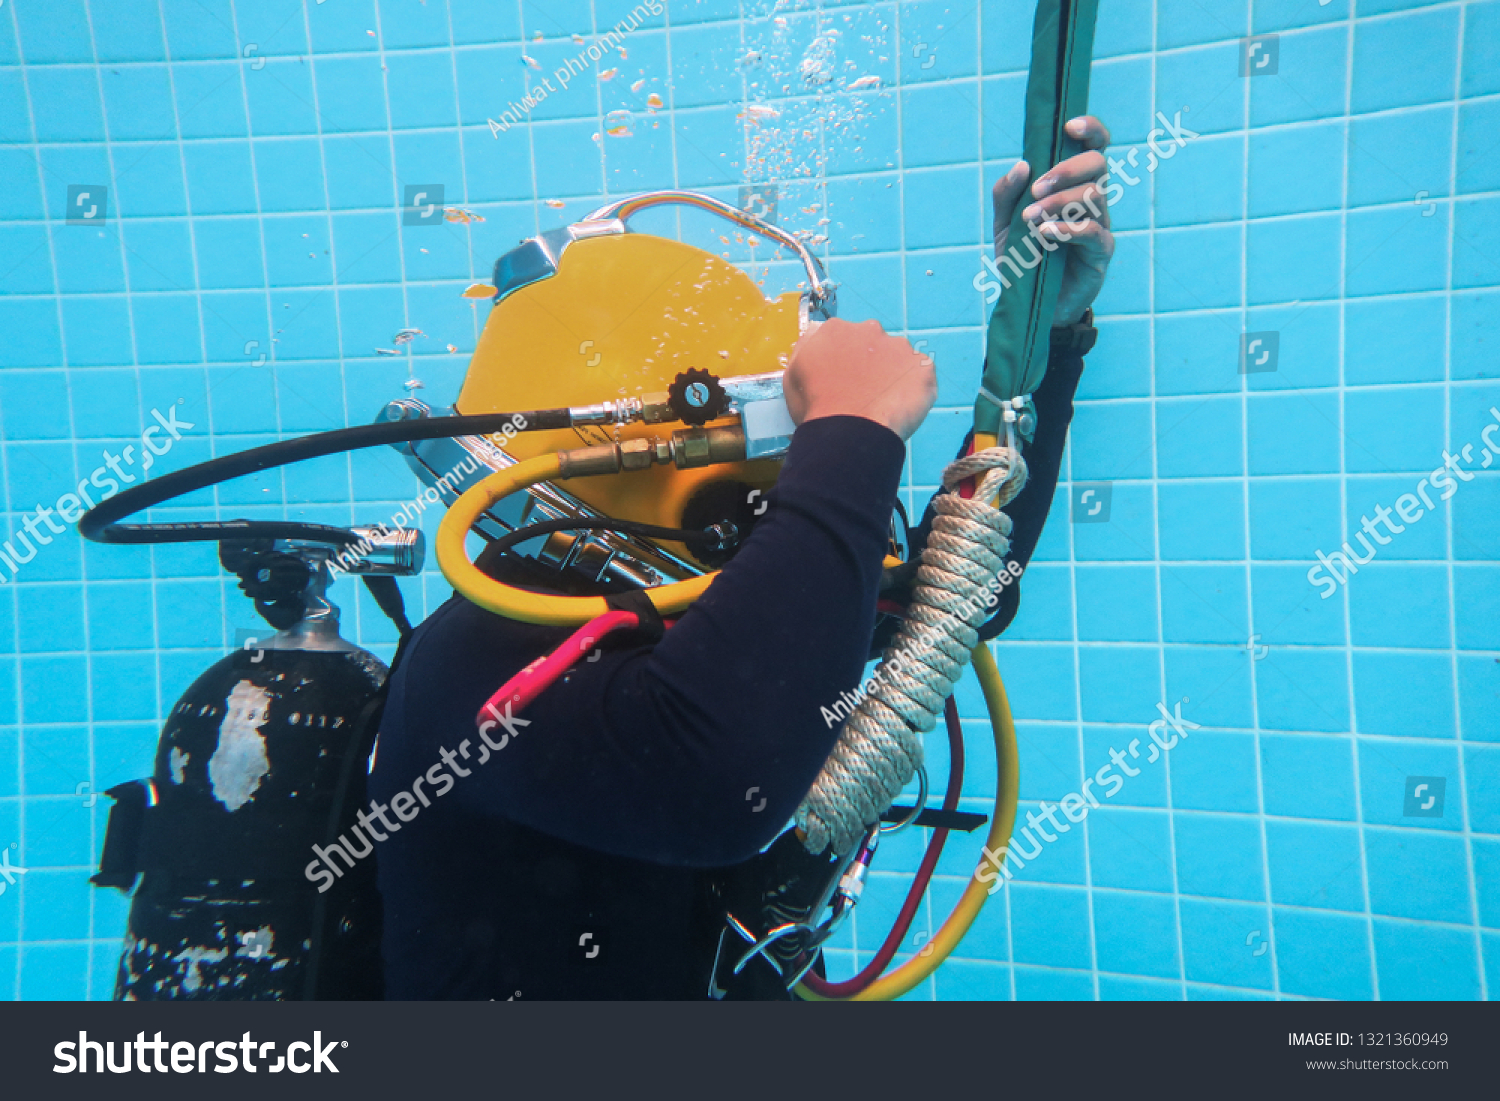 surface supplied commercial diver.
diver.
Underwater. #1321360949